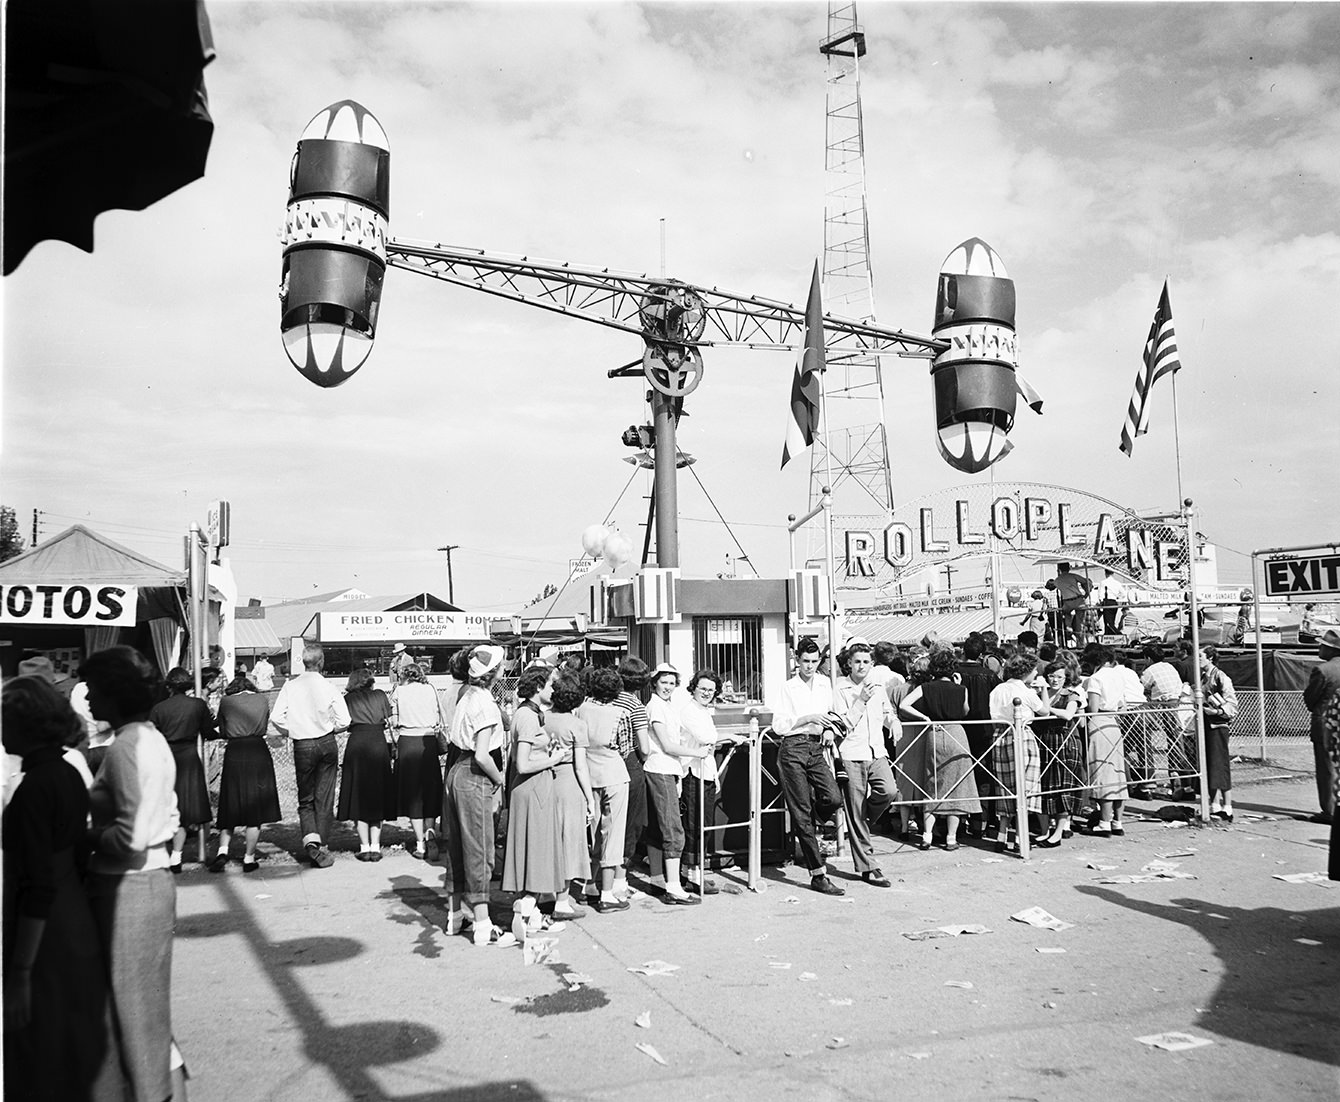 State Fair of Texas Midway ride "Roloplane", 1950